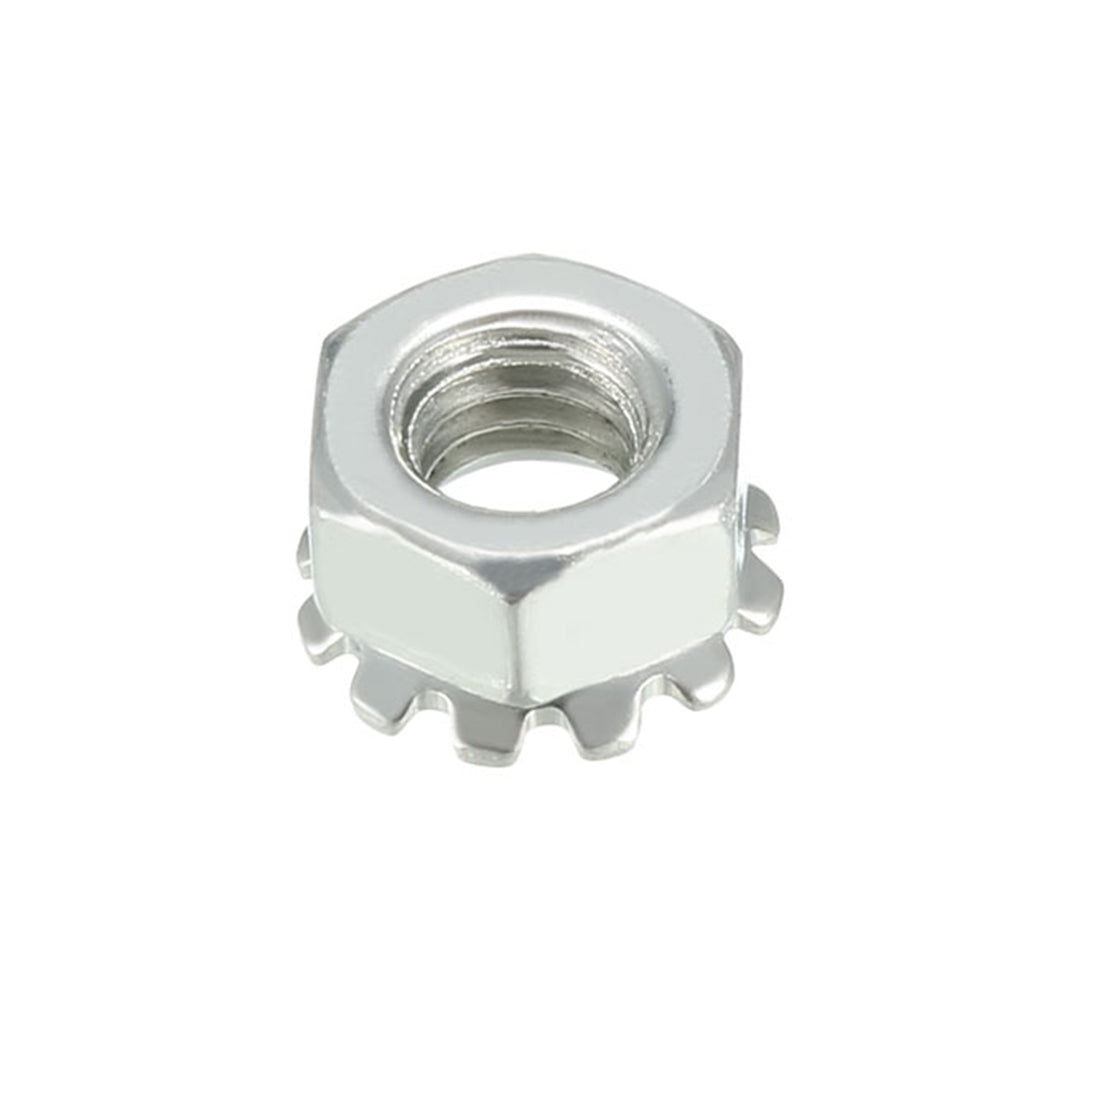 uxcell Uxcell Carbon Steel Female Thread Kep Hex Head Lock Nut 100pcs